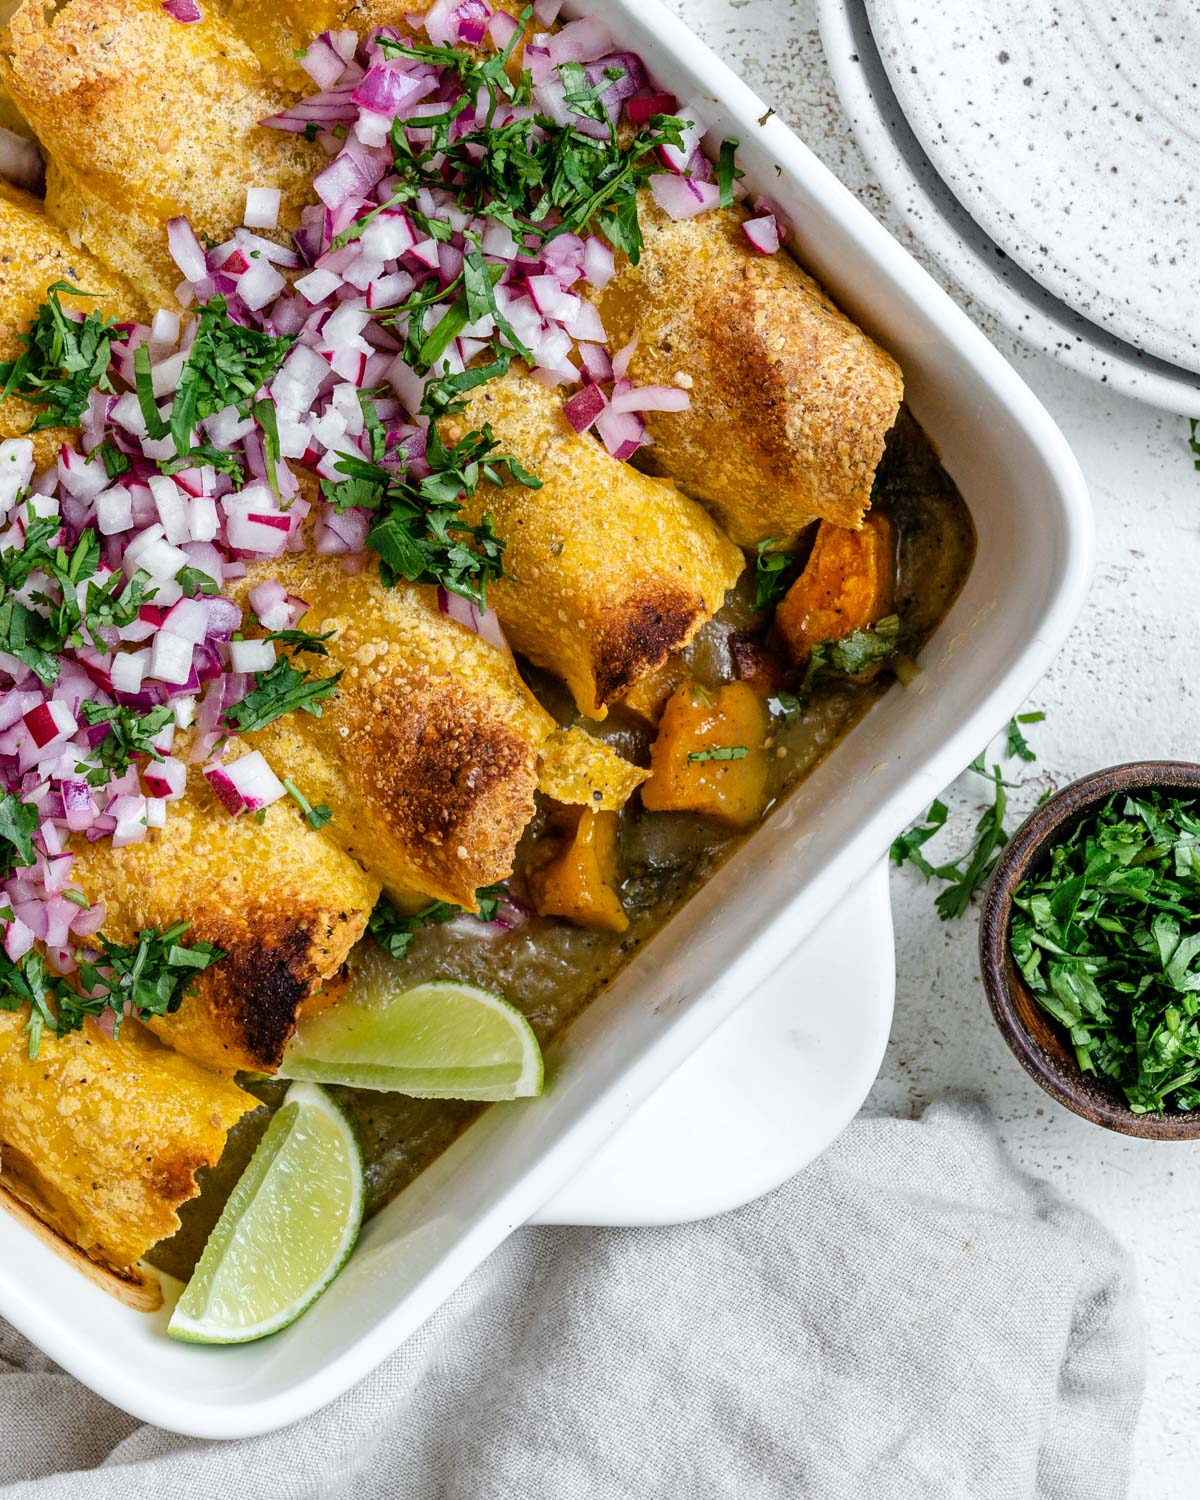 completed Easy Butternut Squash Enchiladas in a baking tray against a white background